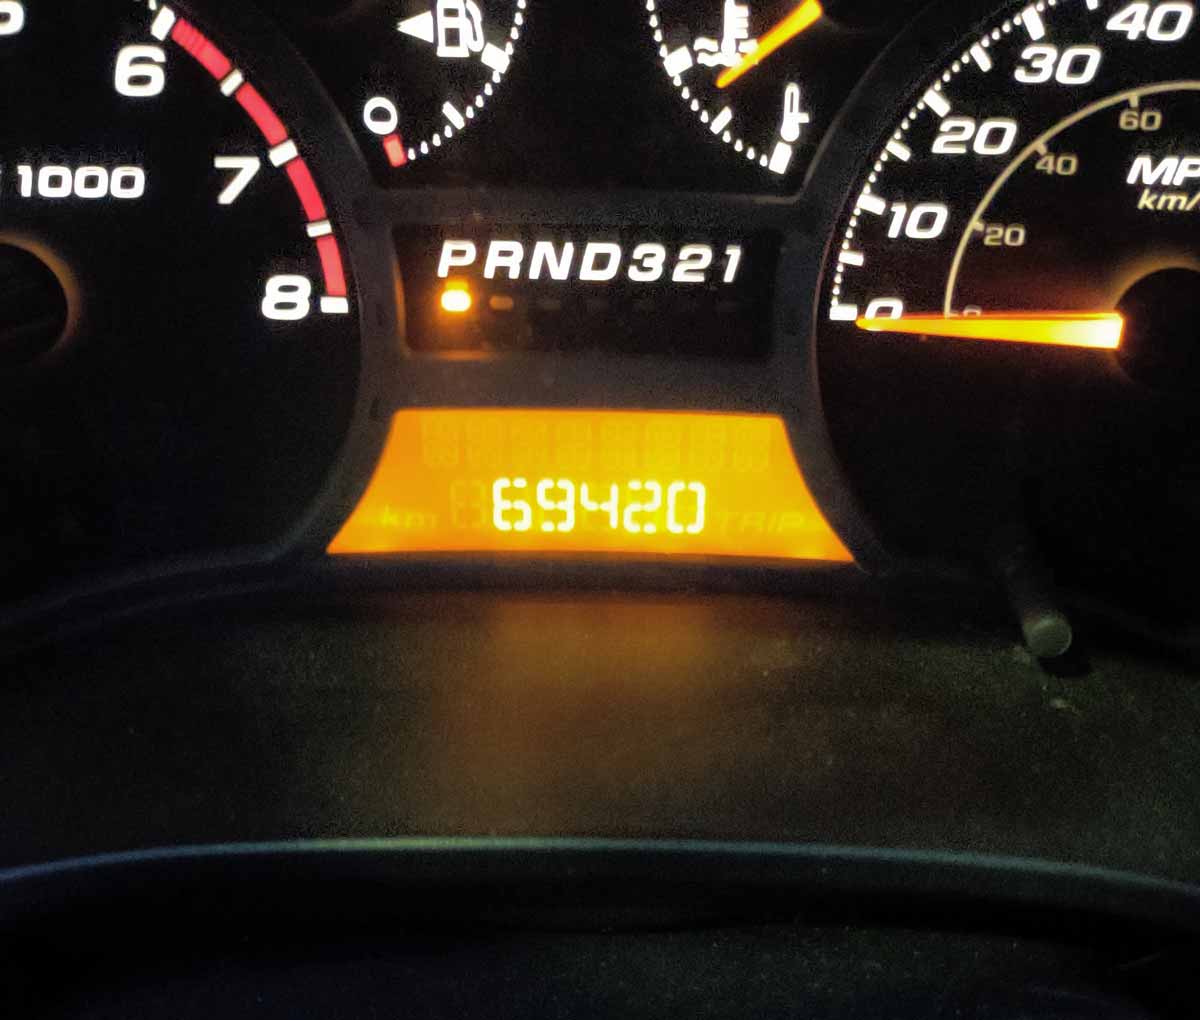 Reached this milestone recently